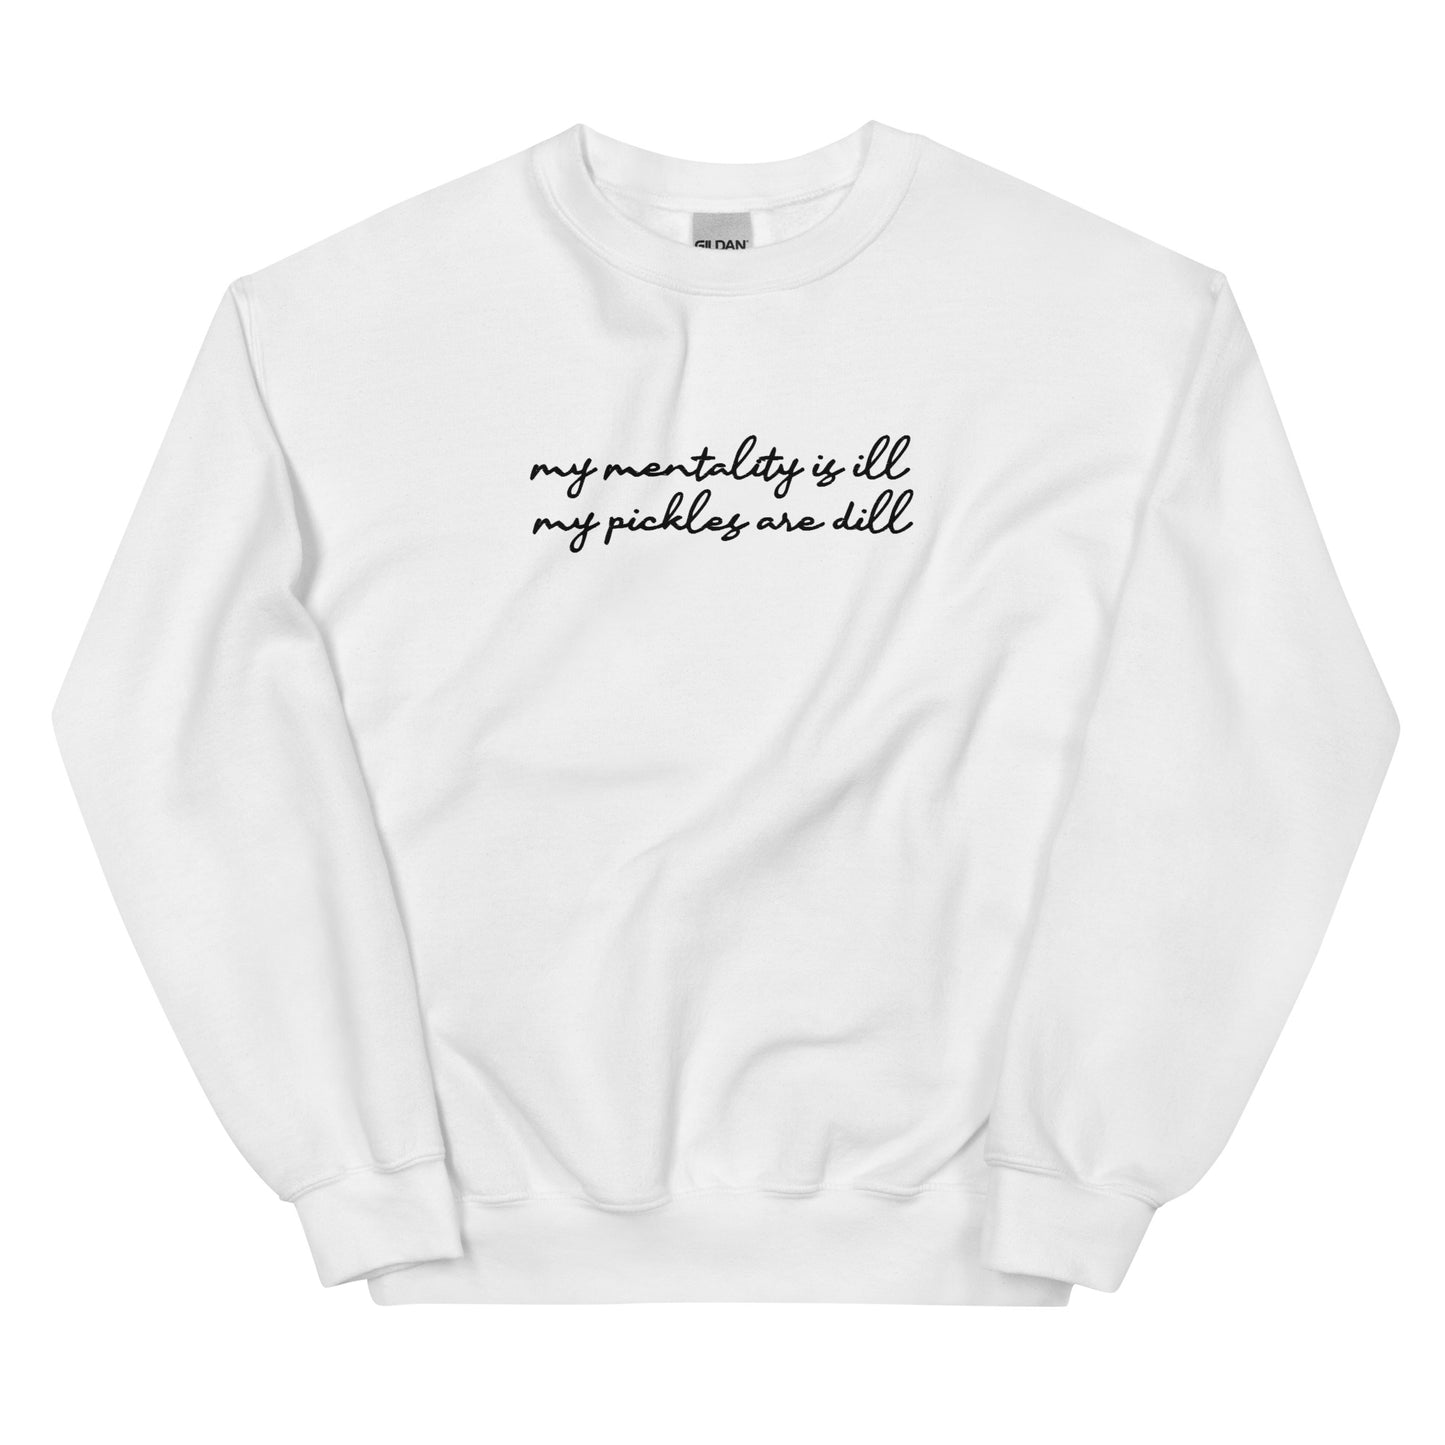 Mentality is Ill, Pickles are Dill (Embroidered) Unisex Sweatshirt